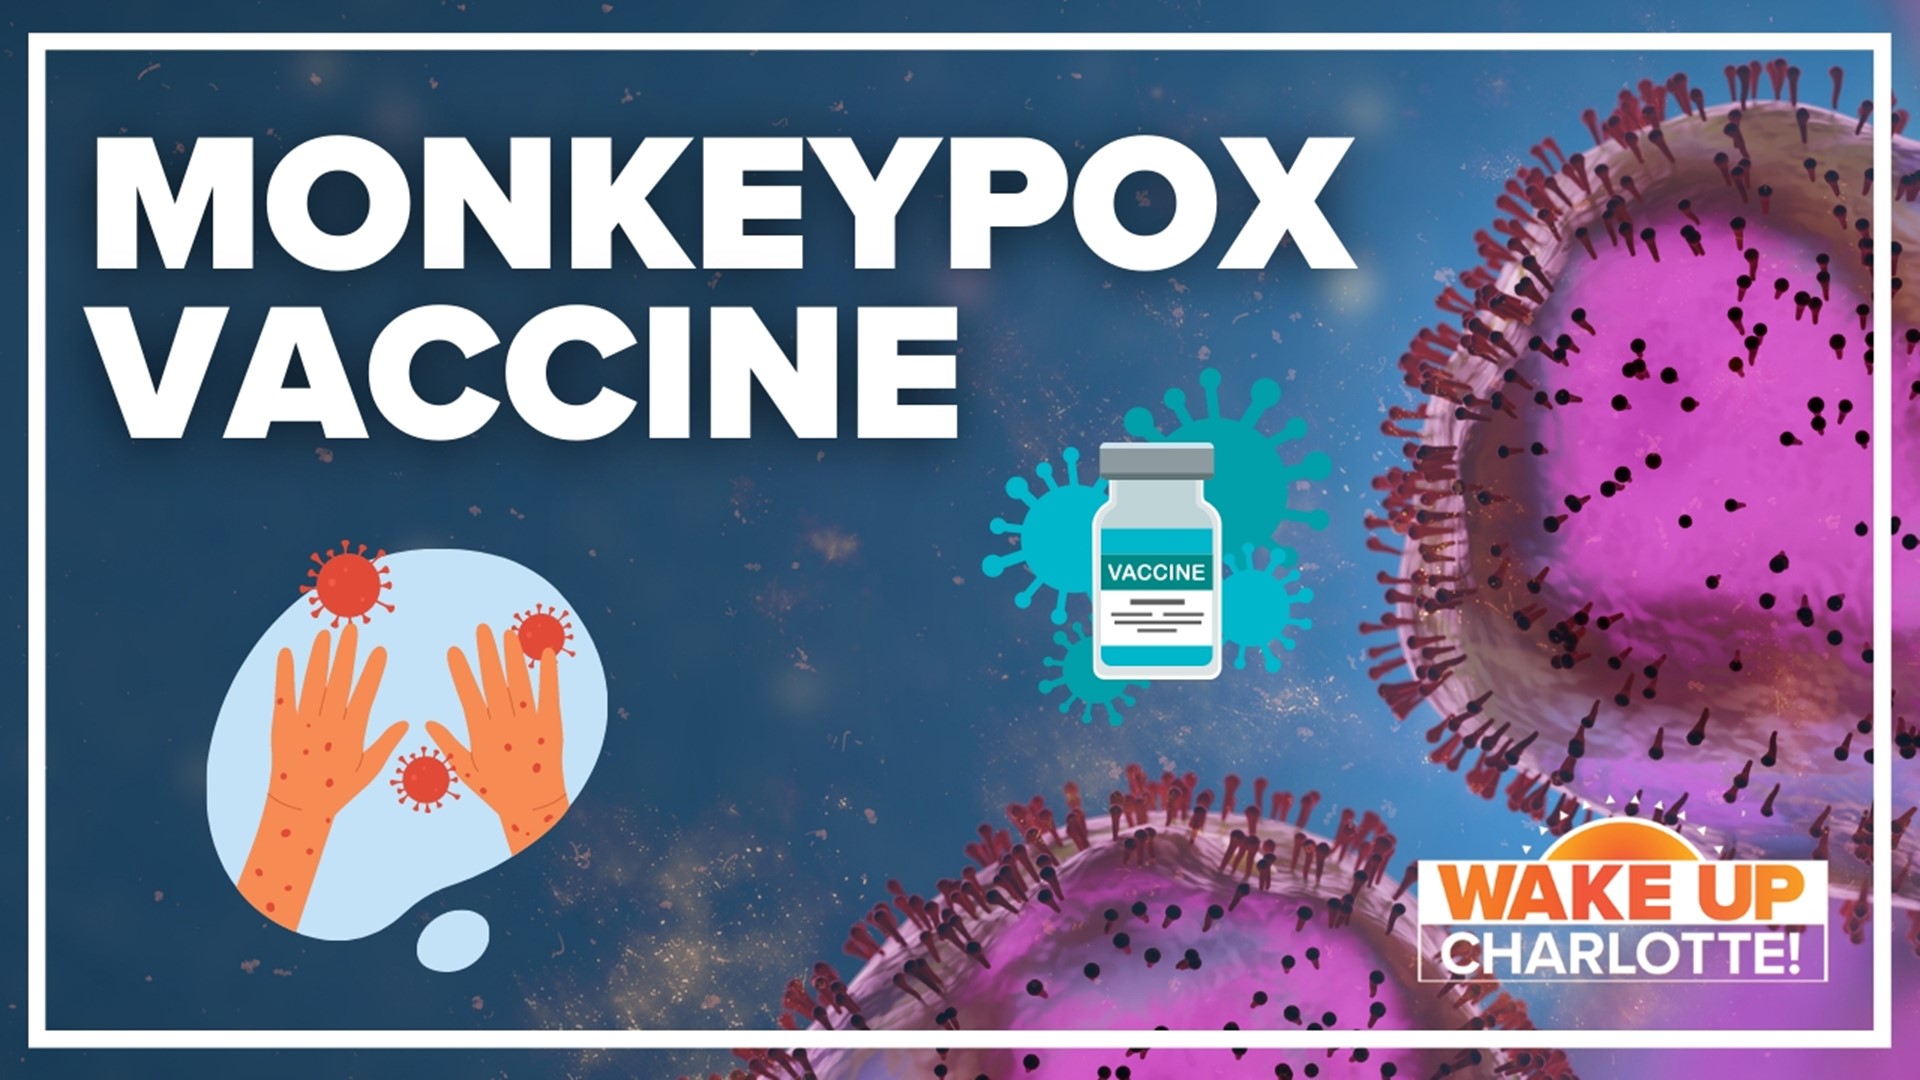 Starting today, more North Carolinians will be eligible for a monkeypox vaccine